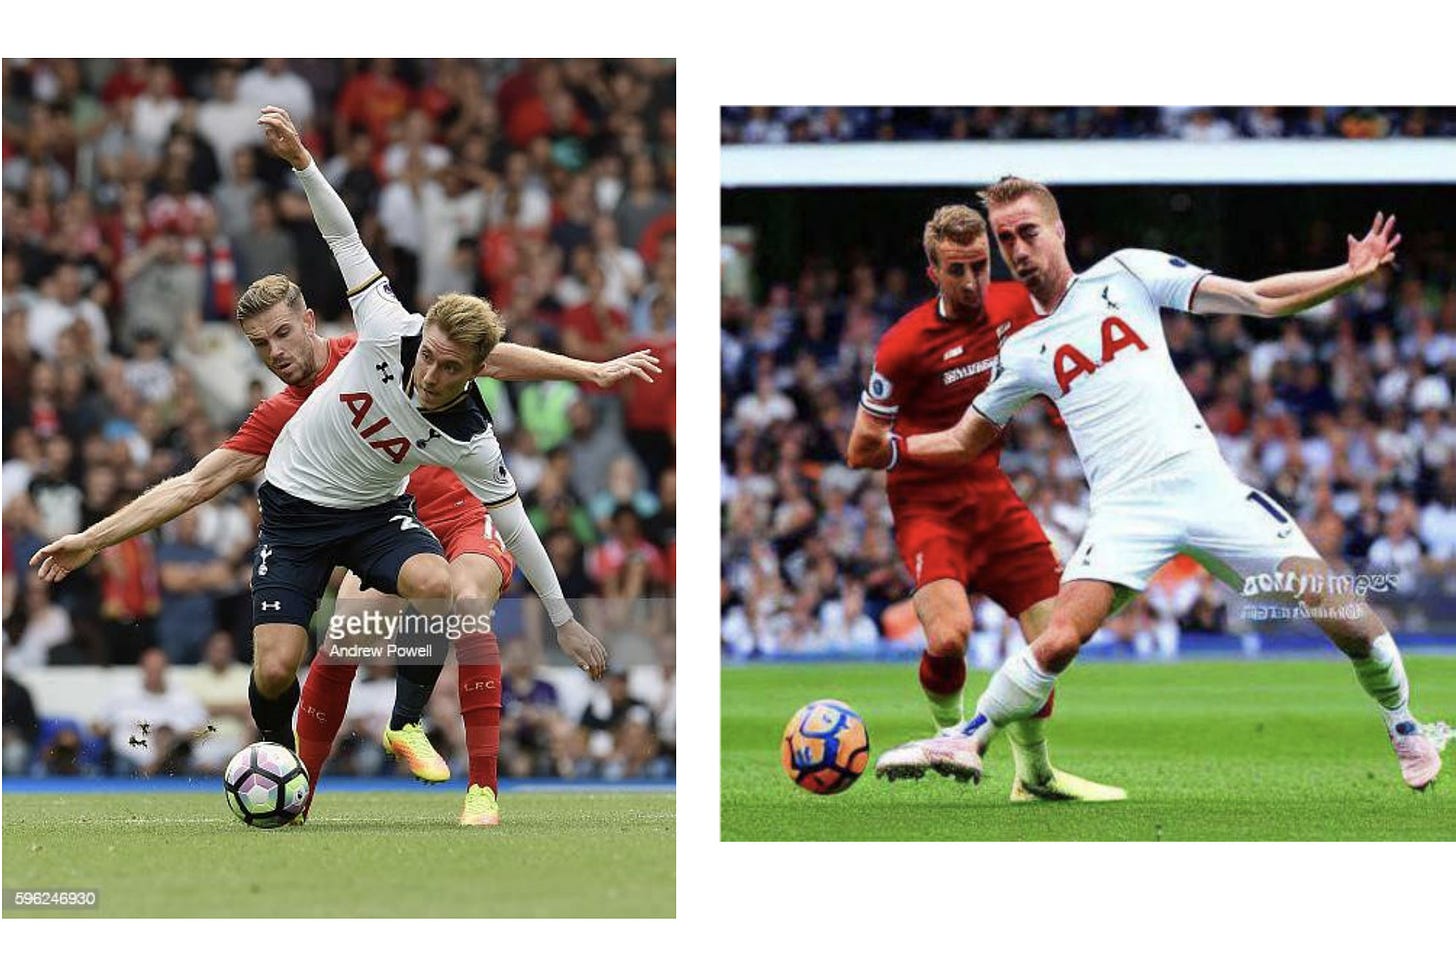 Two side by side images show soccer players fighting for a ball. The left is a real photograph but the right is an AI-generated version, with distortion of the players’ bodies and faces. 